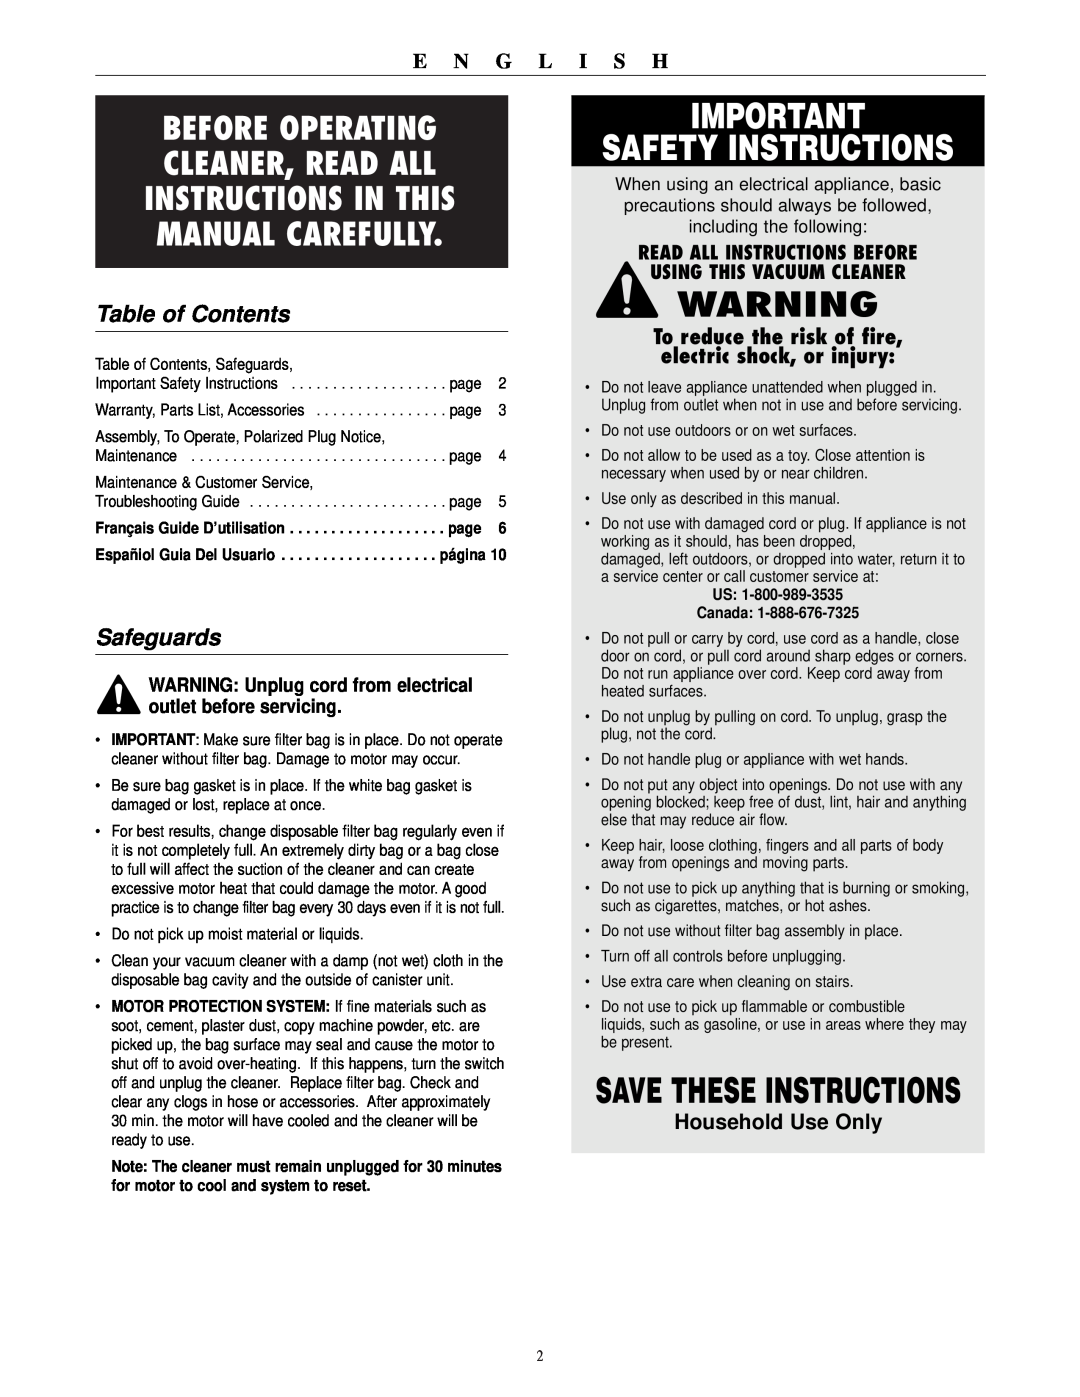 Oreck BB1000 warranty Safety Instructions, Table of Contents, Safeguards, Household Use Only, Read All Instructions Before 